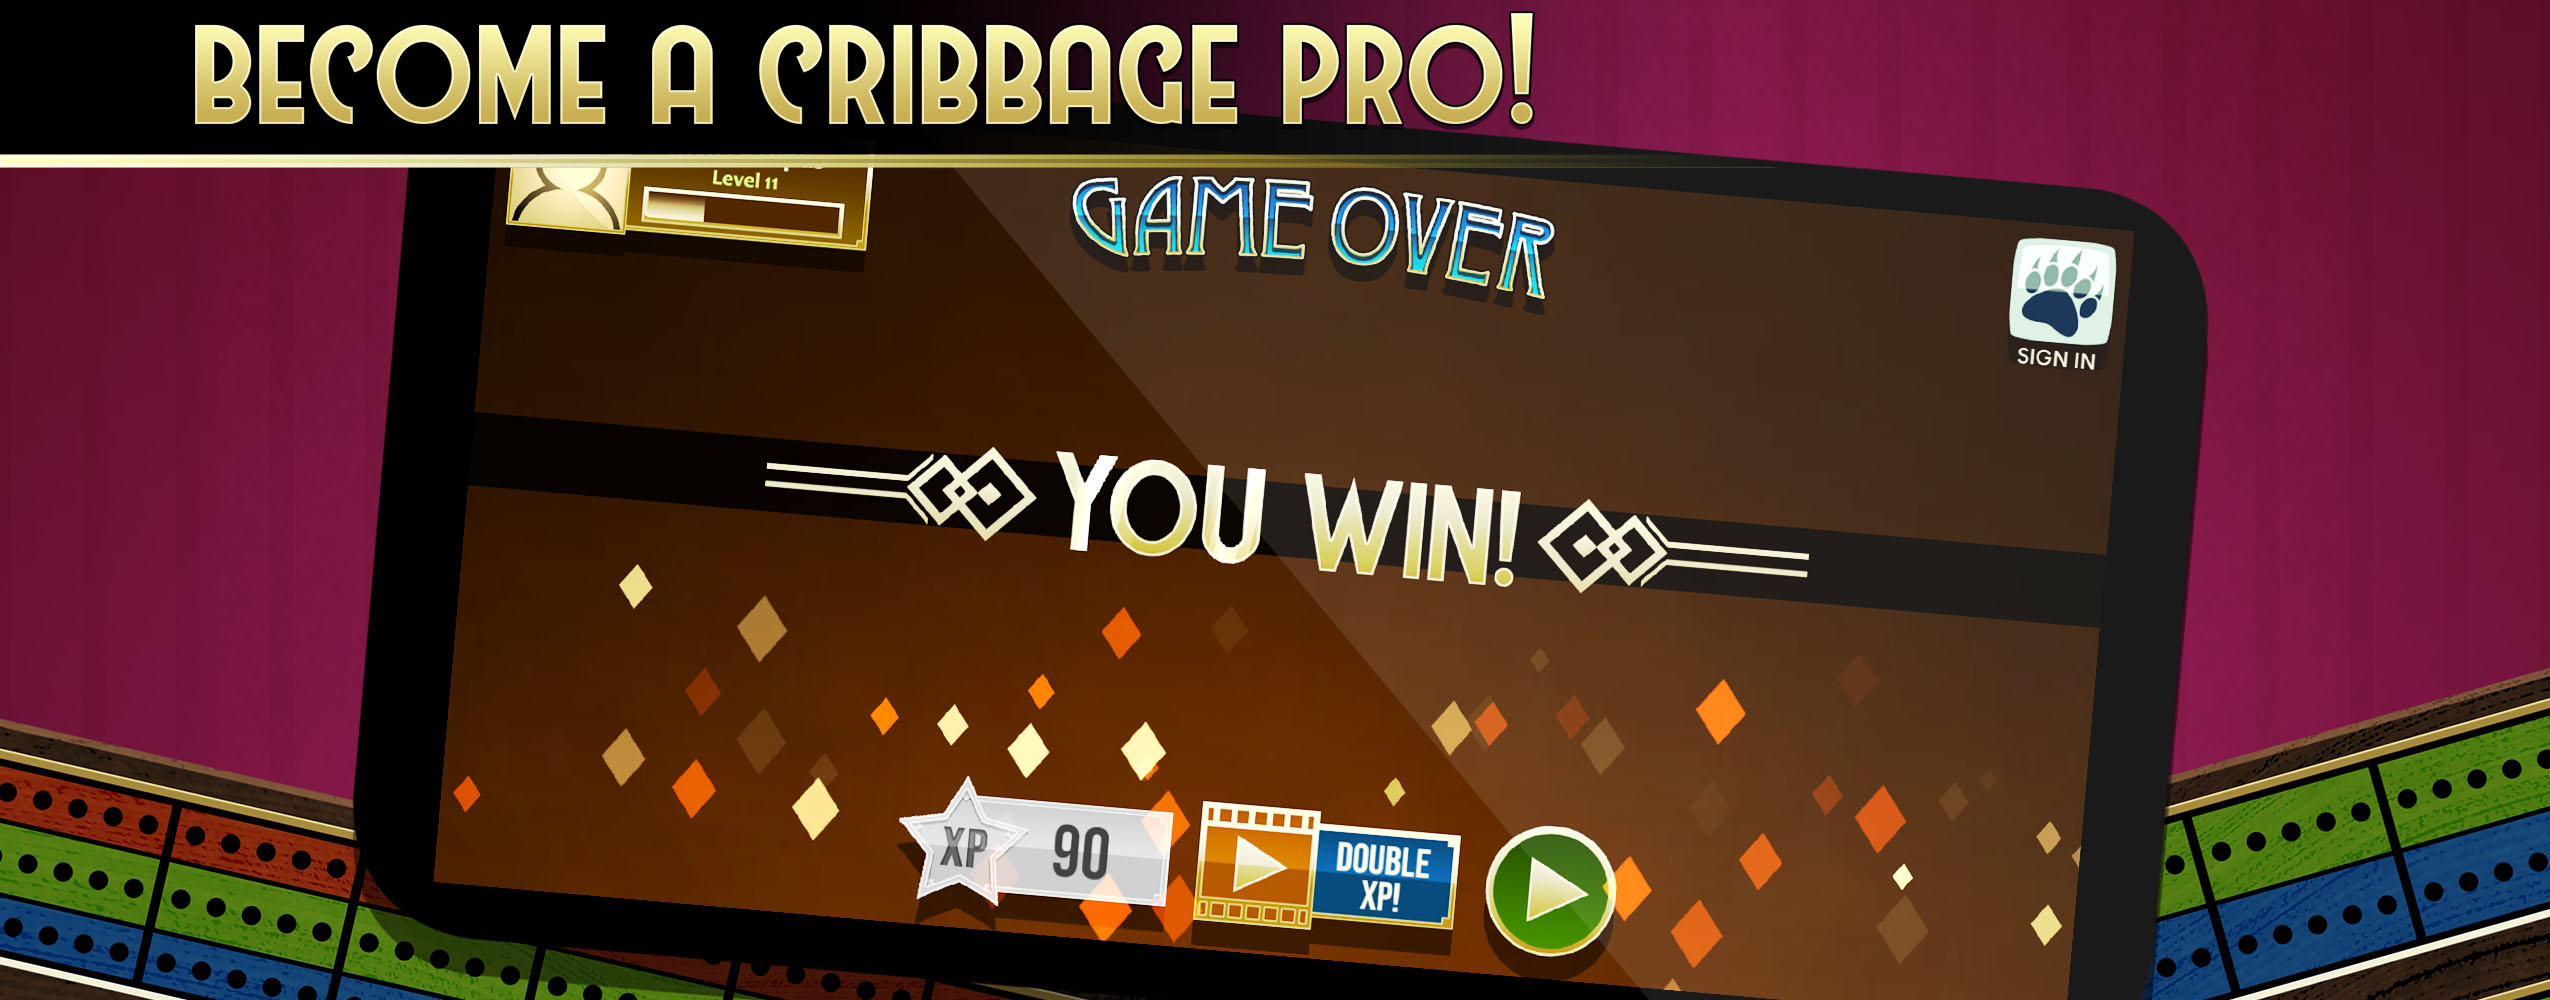 Become a Cribbage Royale Pro!